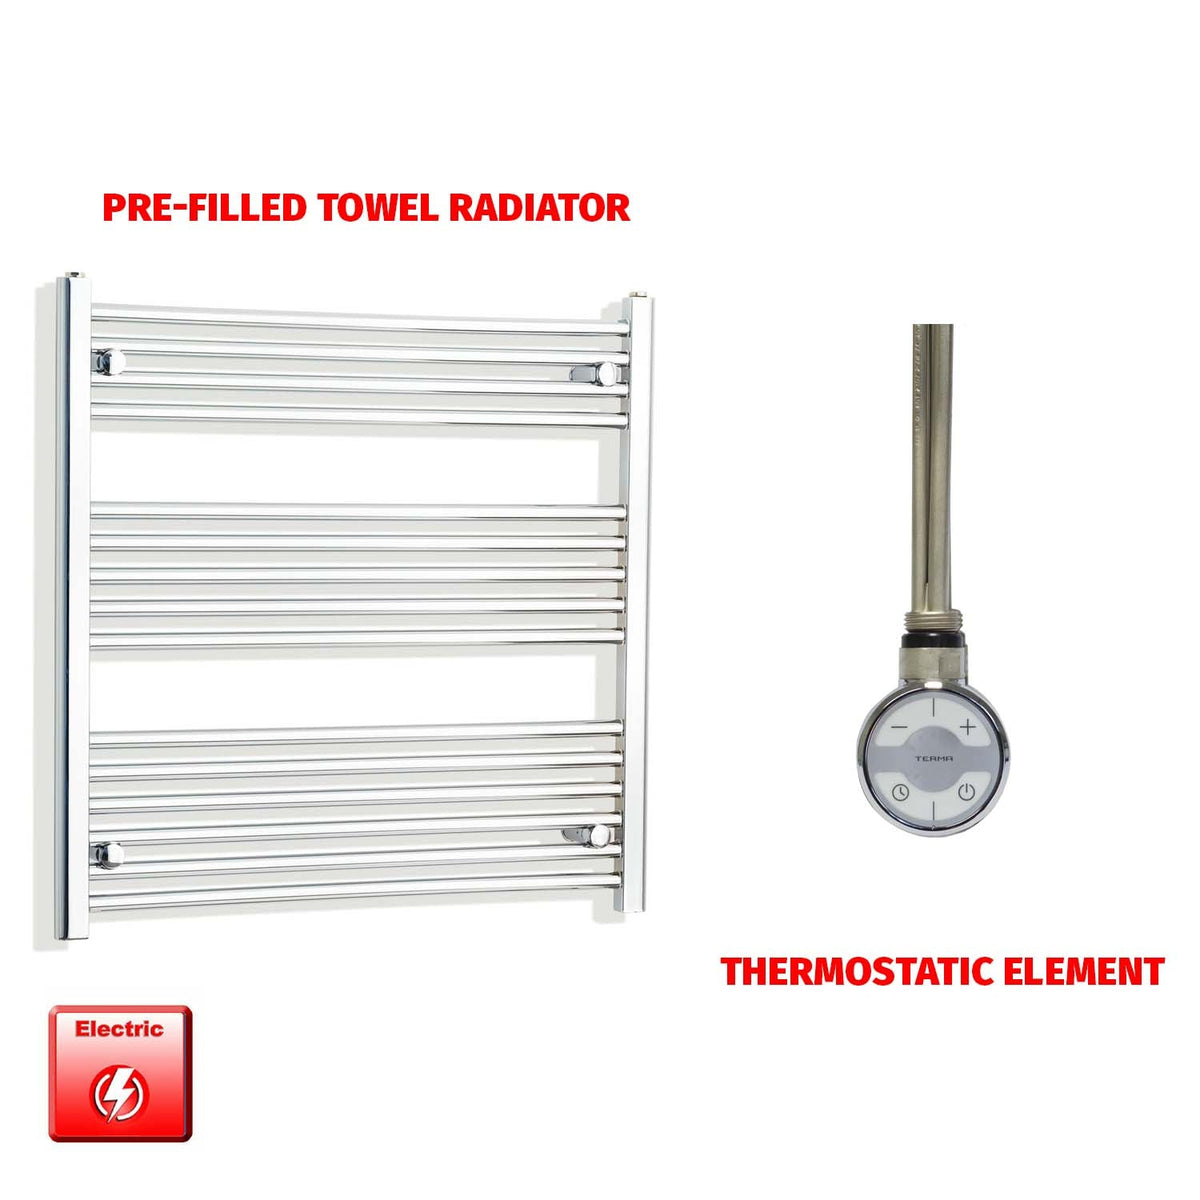 800mm High 850mm Wide Pre-Filled Electric Heated Towel Rail Radiator Straight Chrome MOA Thermostatic element no timer